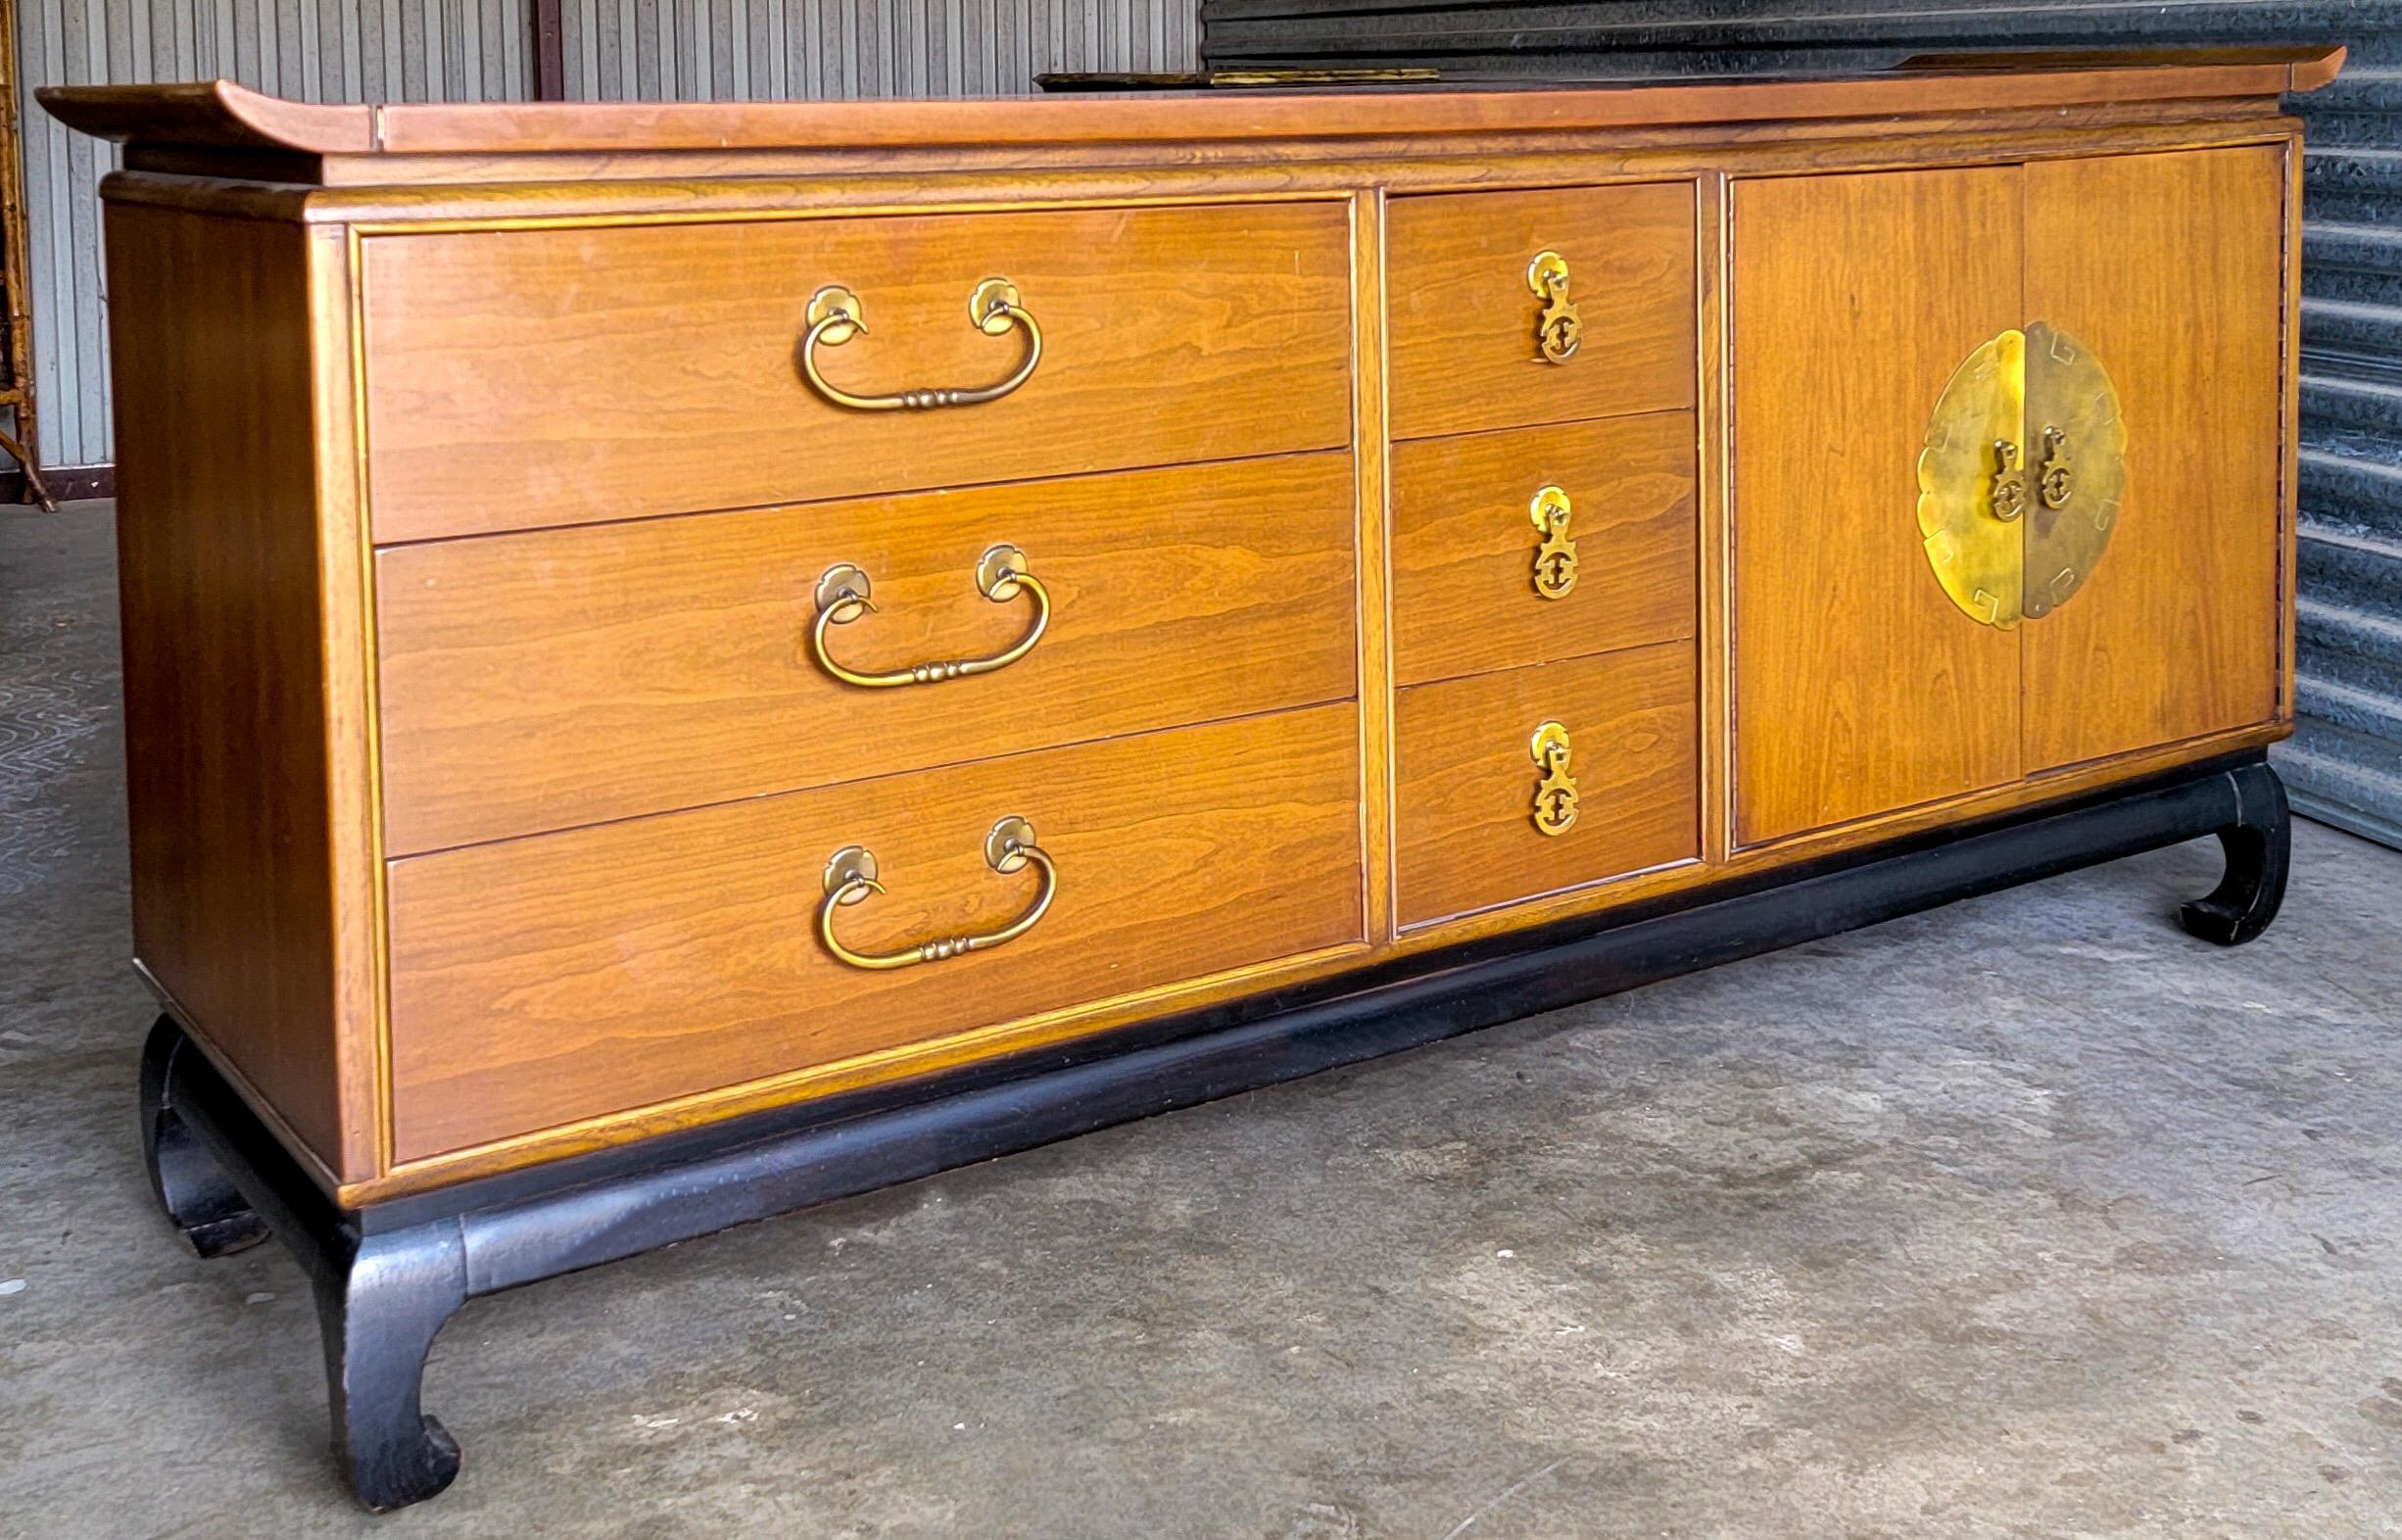 A versatile piece! From media storage to dining to bedroom, this Kent Coffey credenza is a winner. It is part of the Amerasia line that he designed in the 1970s. It is walnut with an ebonized Ming form base. The interior has drawers with dovetail